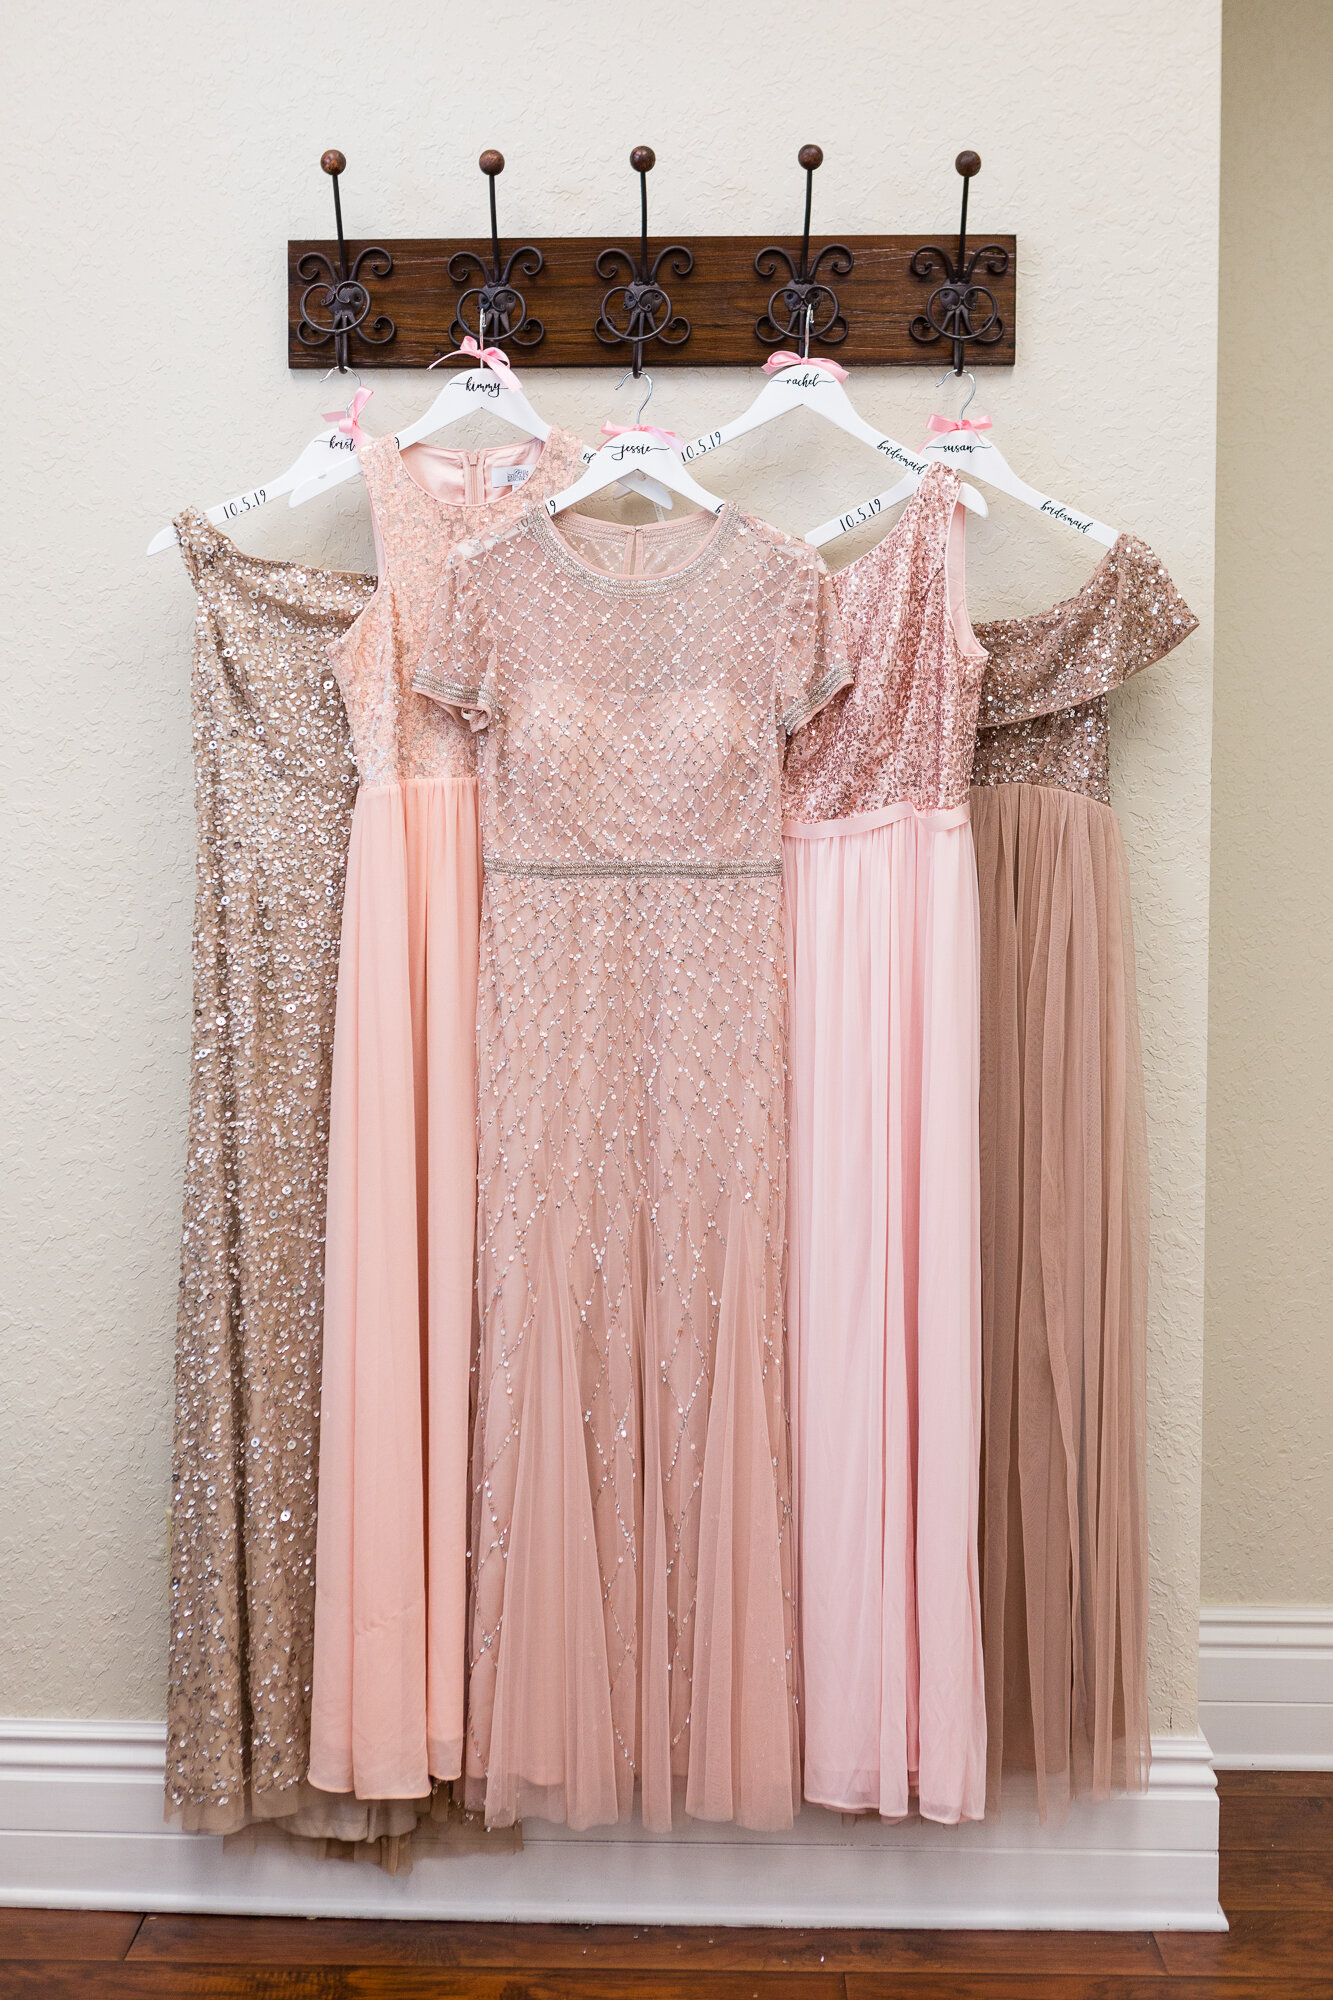 Shades of pale pink and rose gold bridesmaids dresses in a variety of figure-flattering styles.